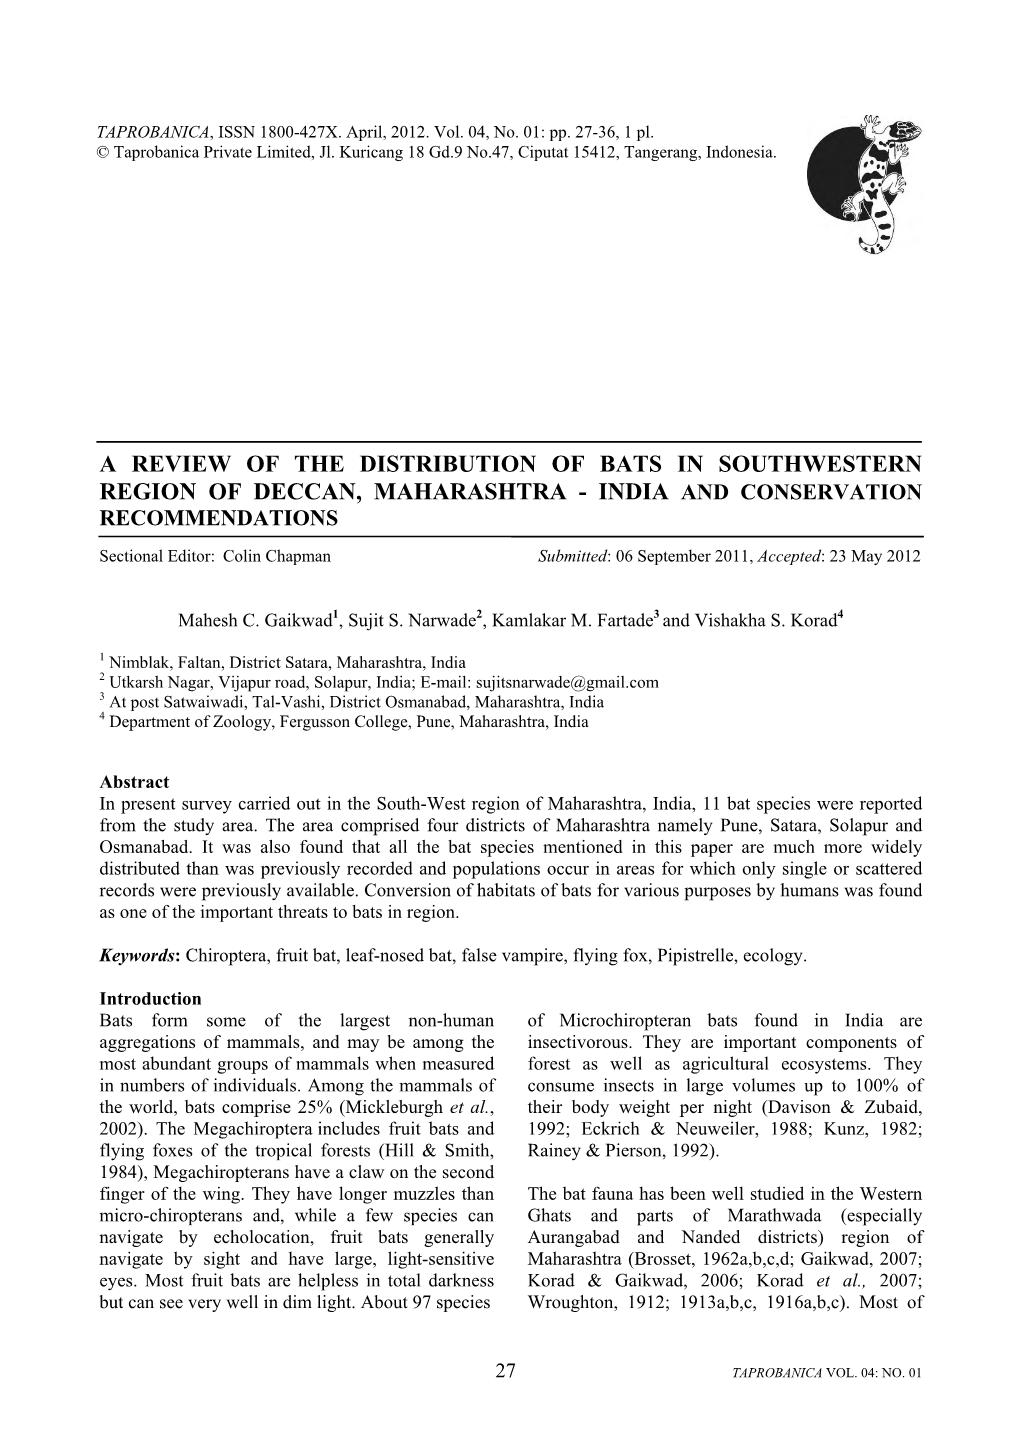 A Review of the Distribution of Bats in Southwestern Region of Deccan, Maharashtra - India and Conservation Recommendations